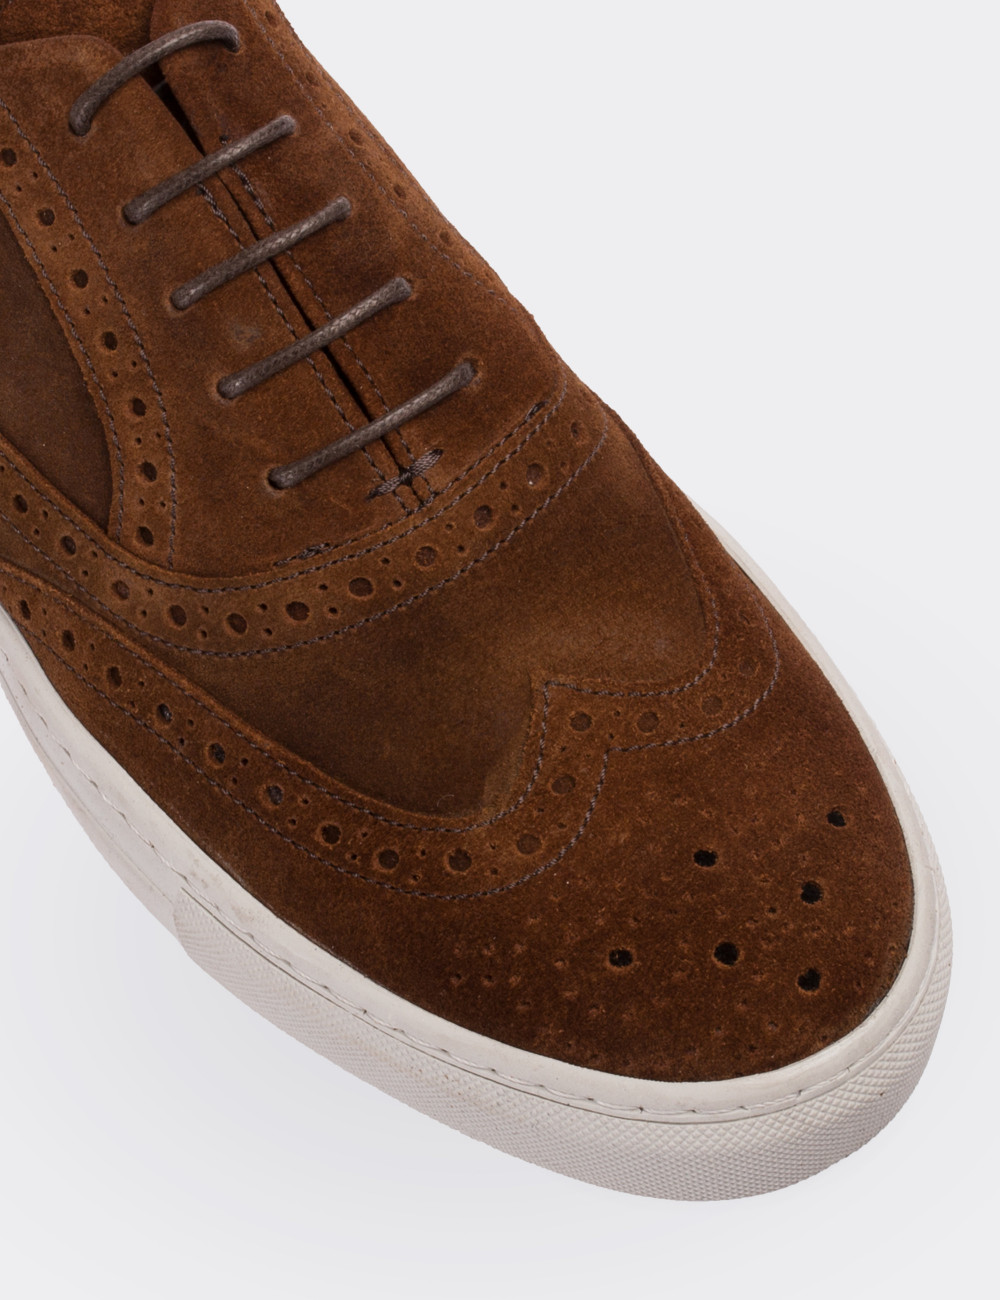 Tan Suede Leather Sneakers - 01637MTBAC02